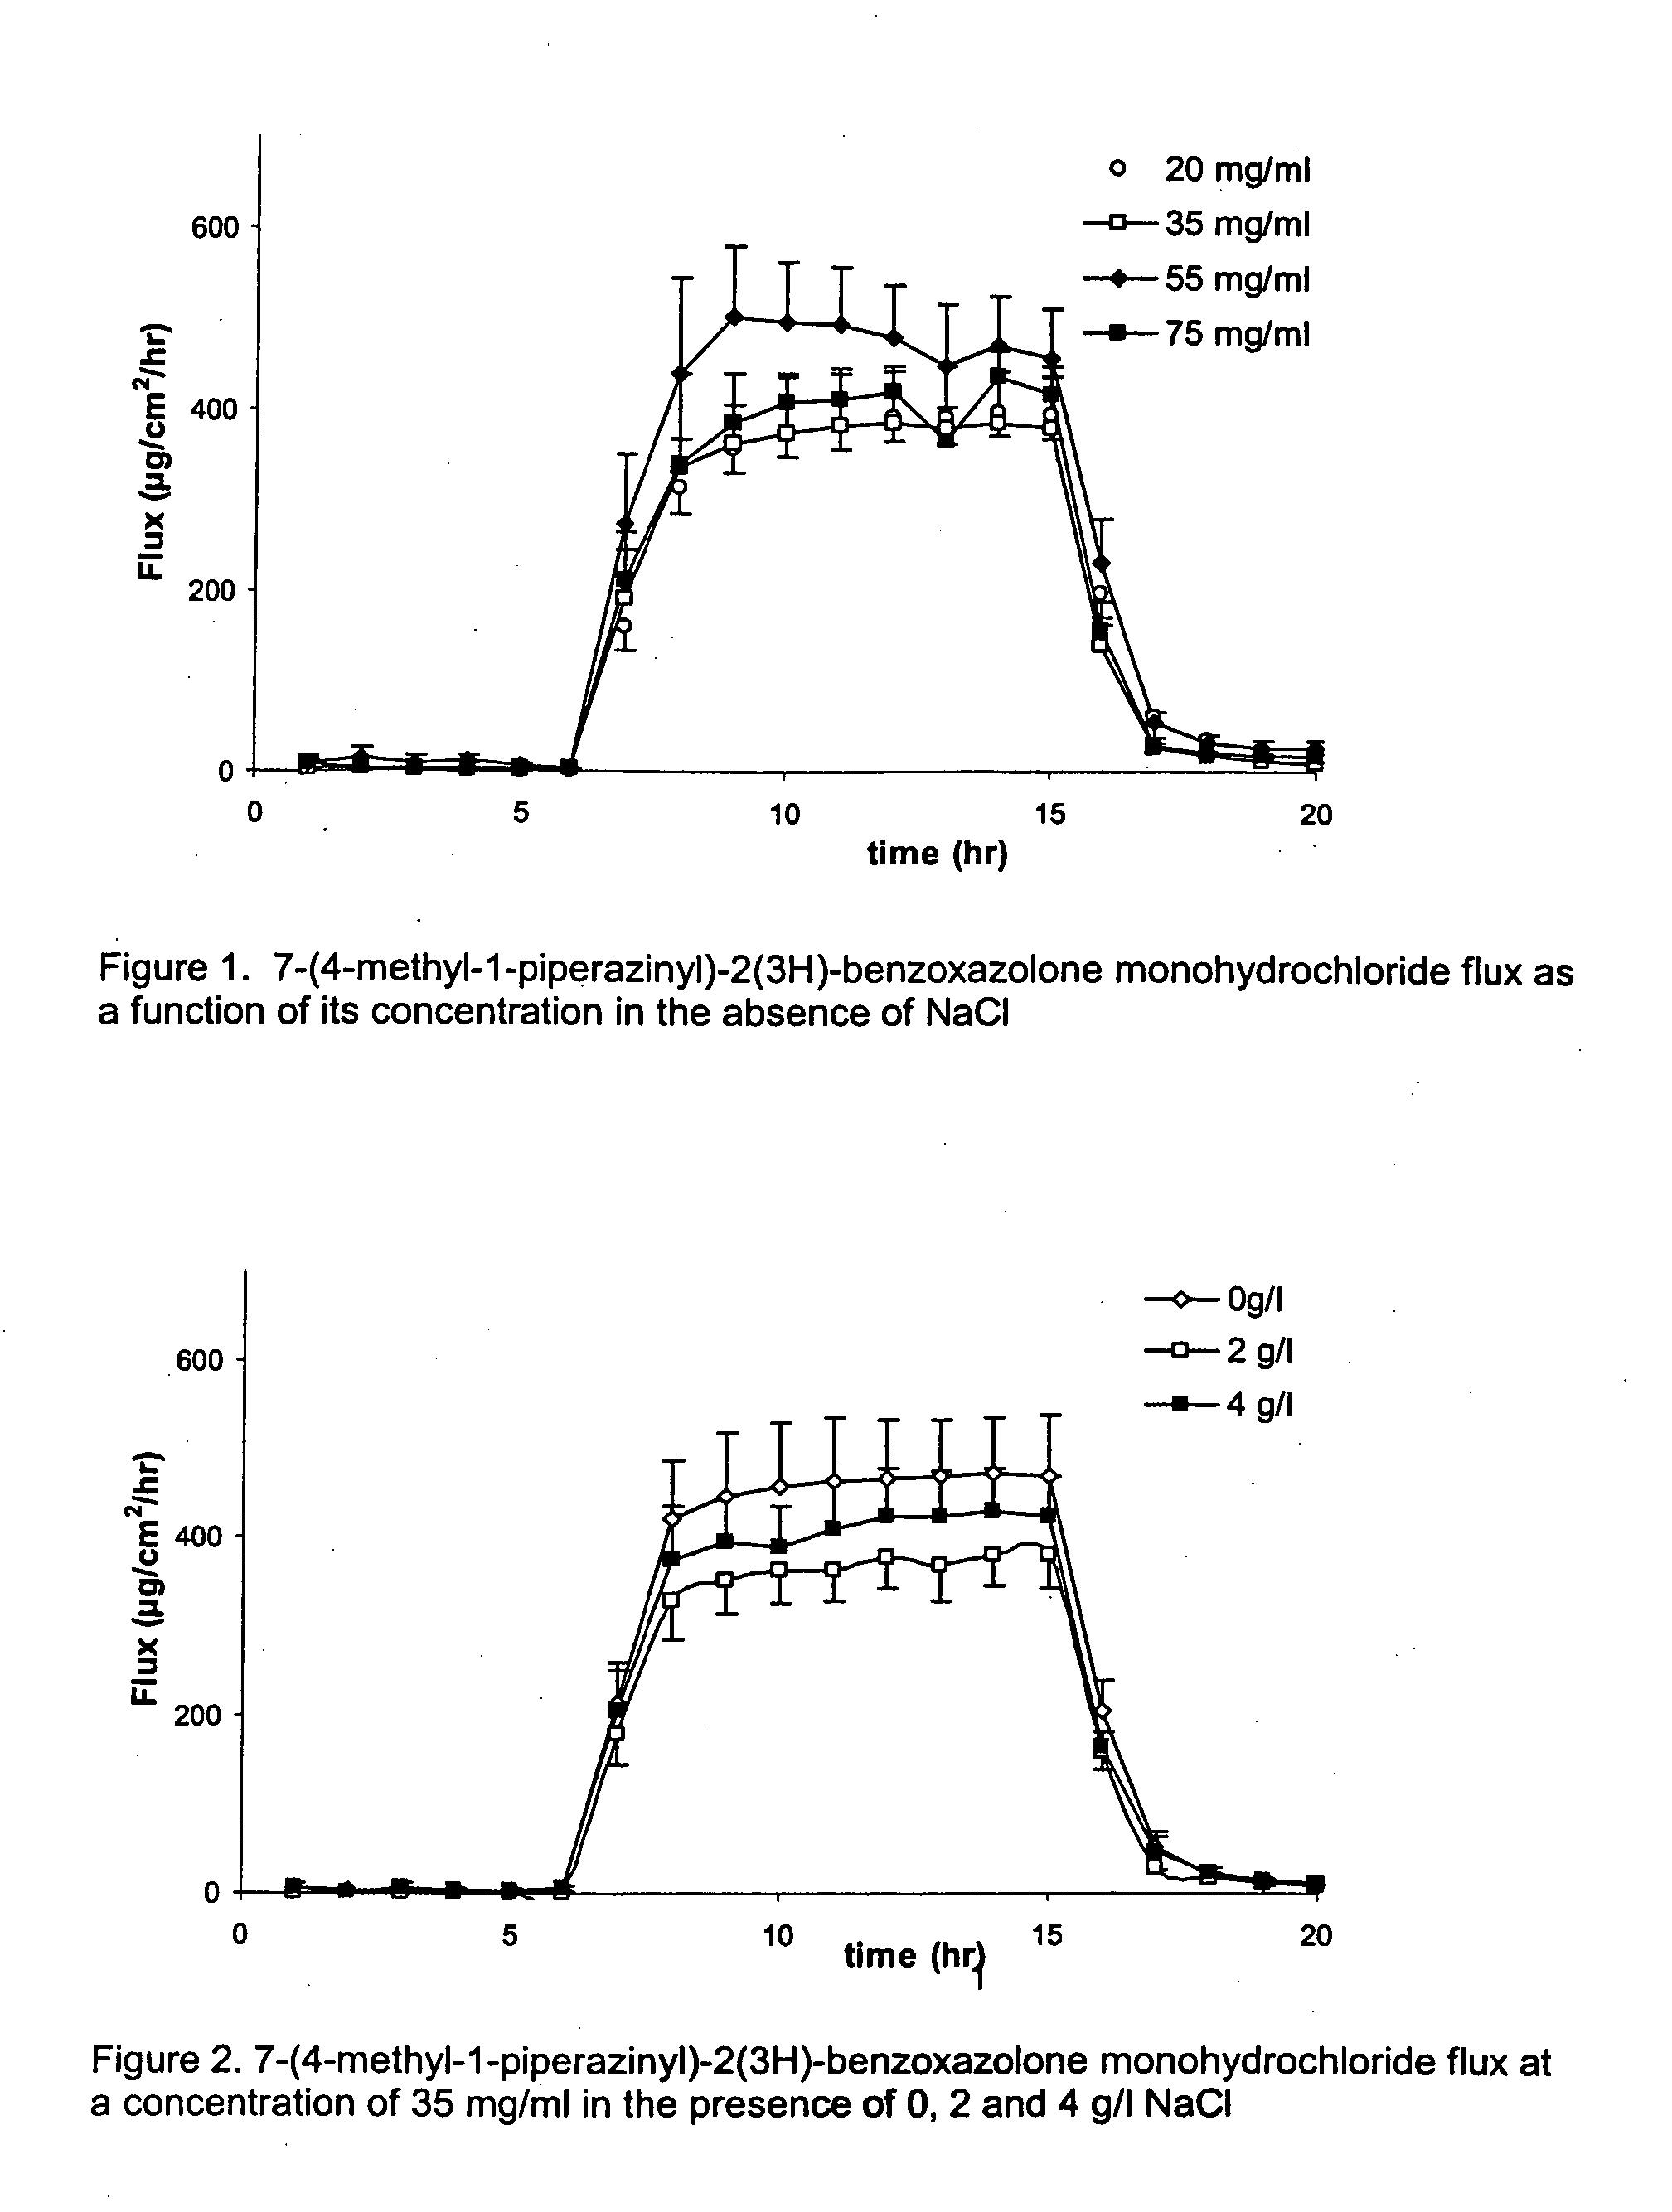 Transdermal iontophoretic delivery of piperazinyl-2(3H)-benzoxazolone compounds